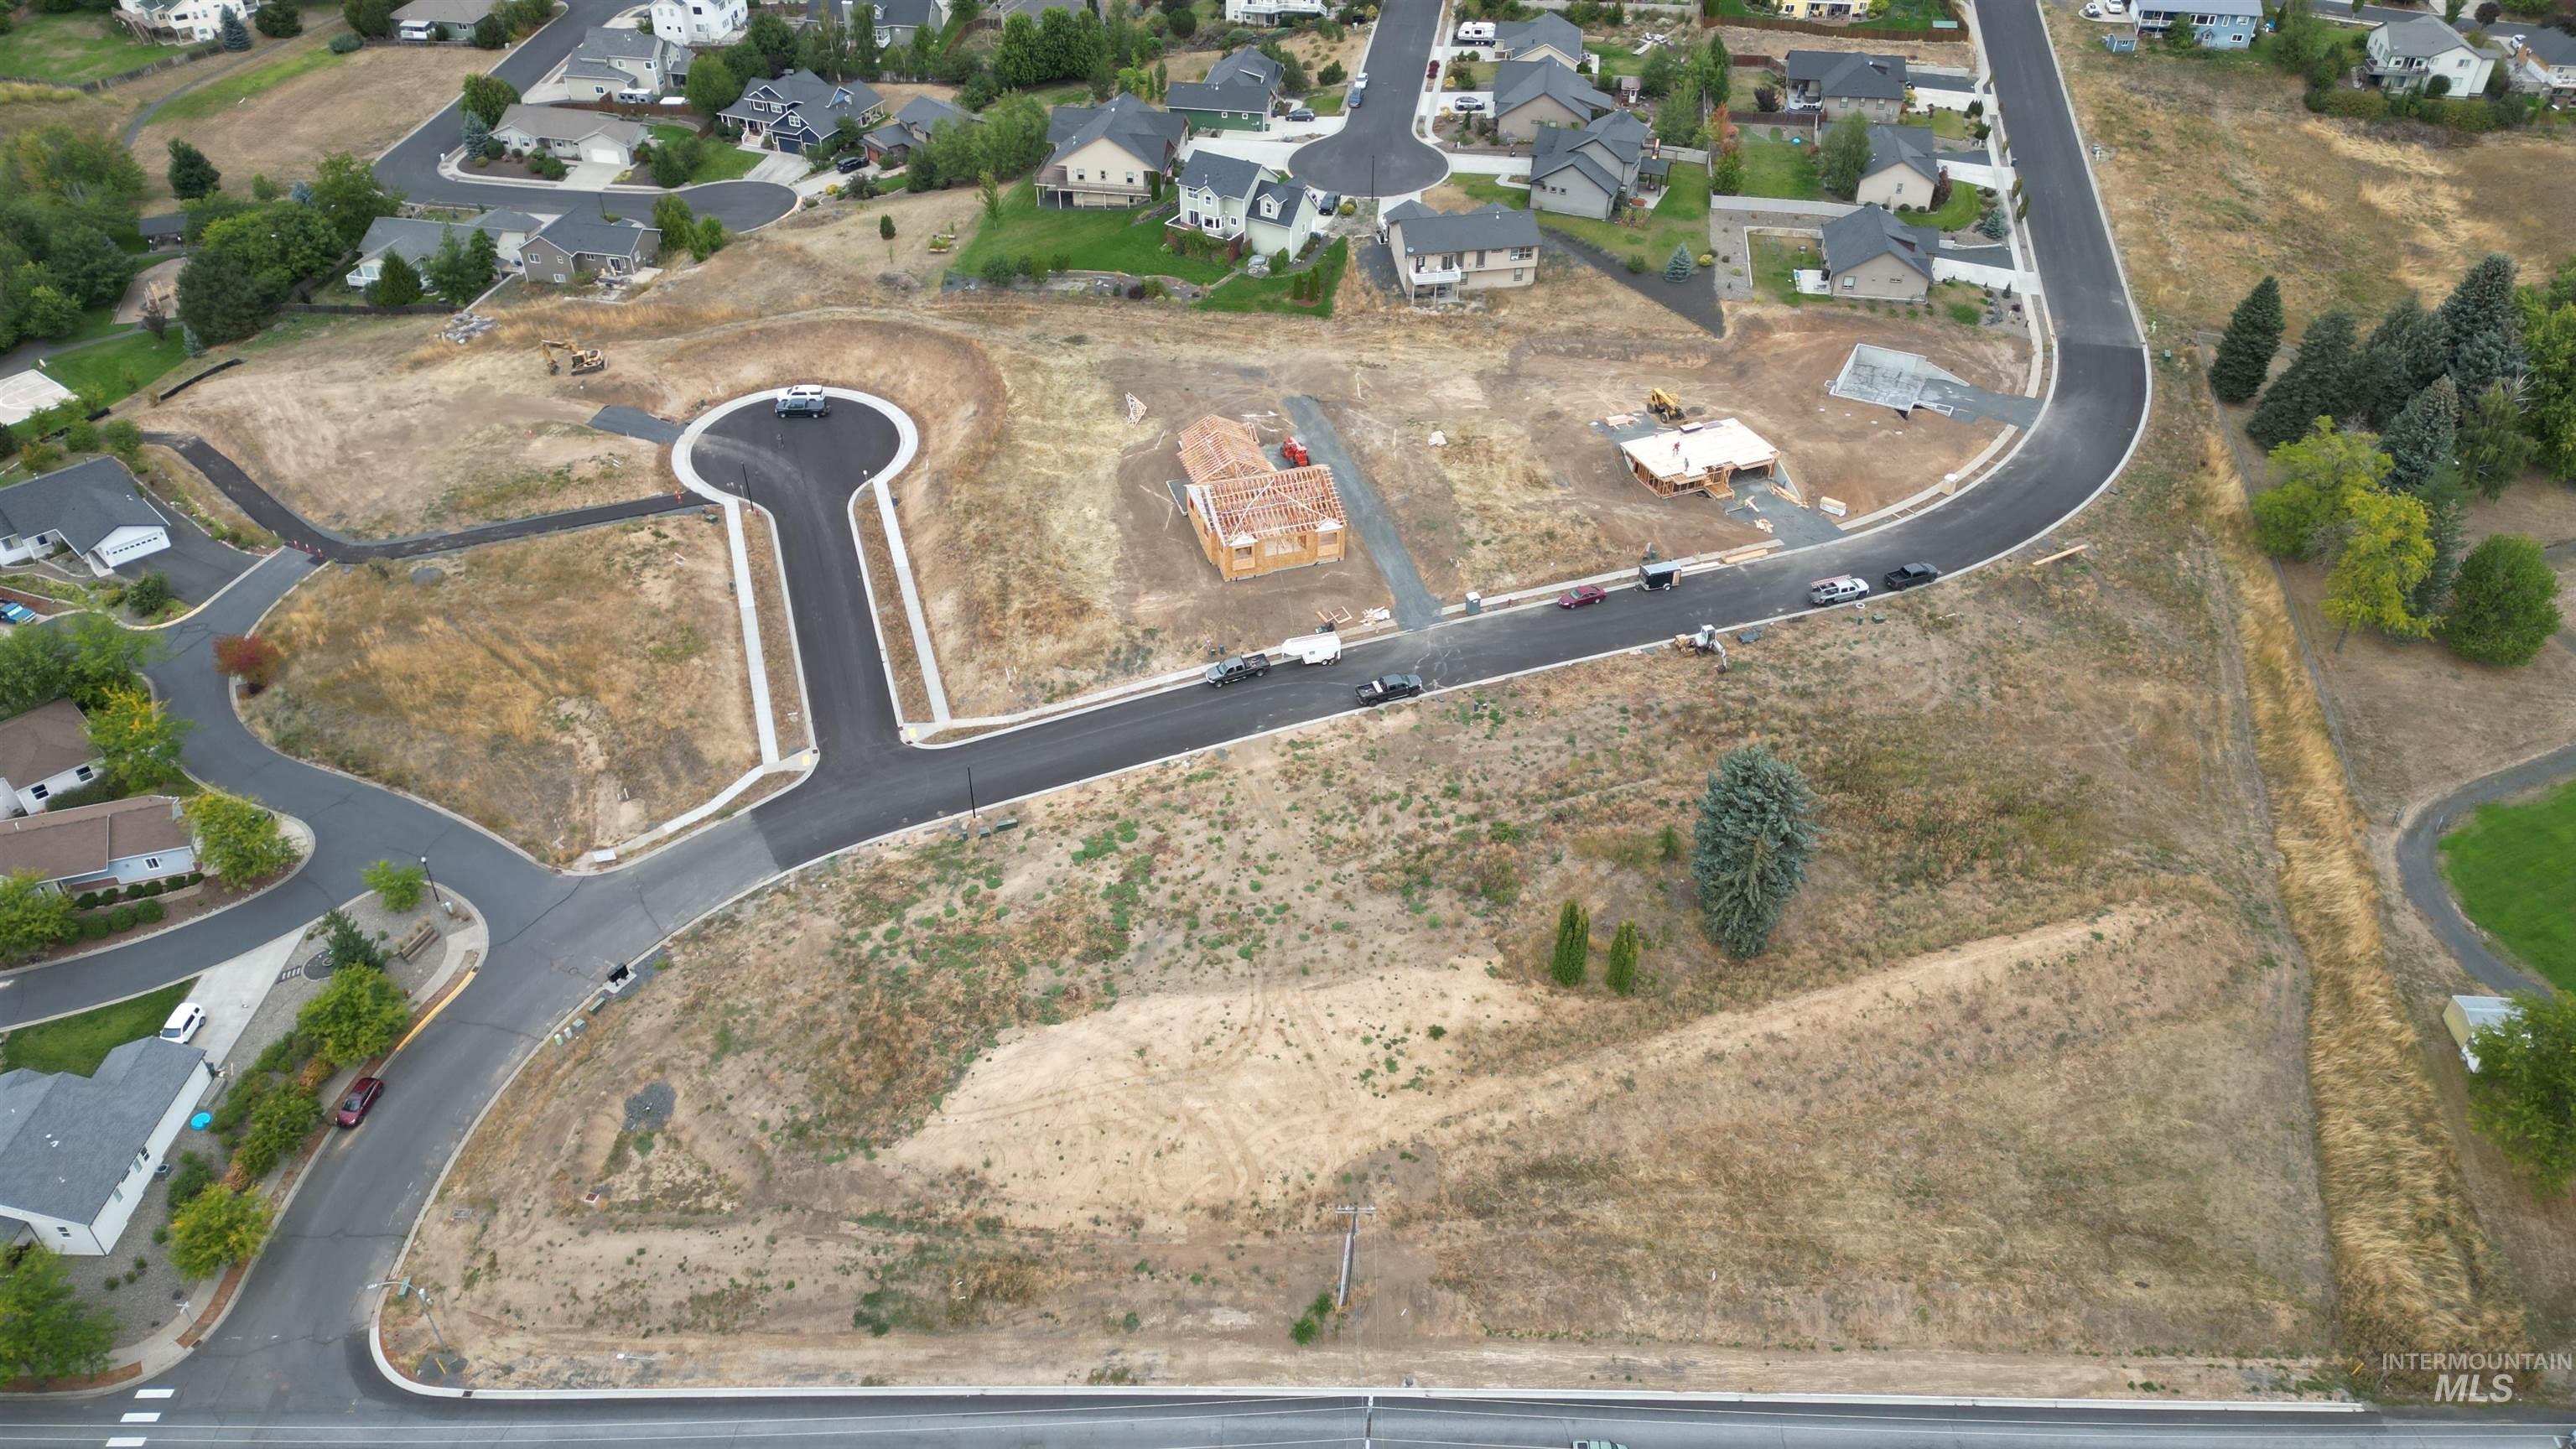 1998 Ben Gifford Court, Moscow, Idaho 83843, Land For Sale, Price $160,000,MLS 98888861